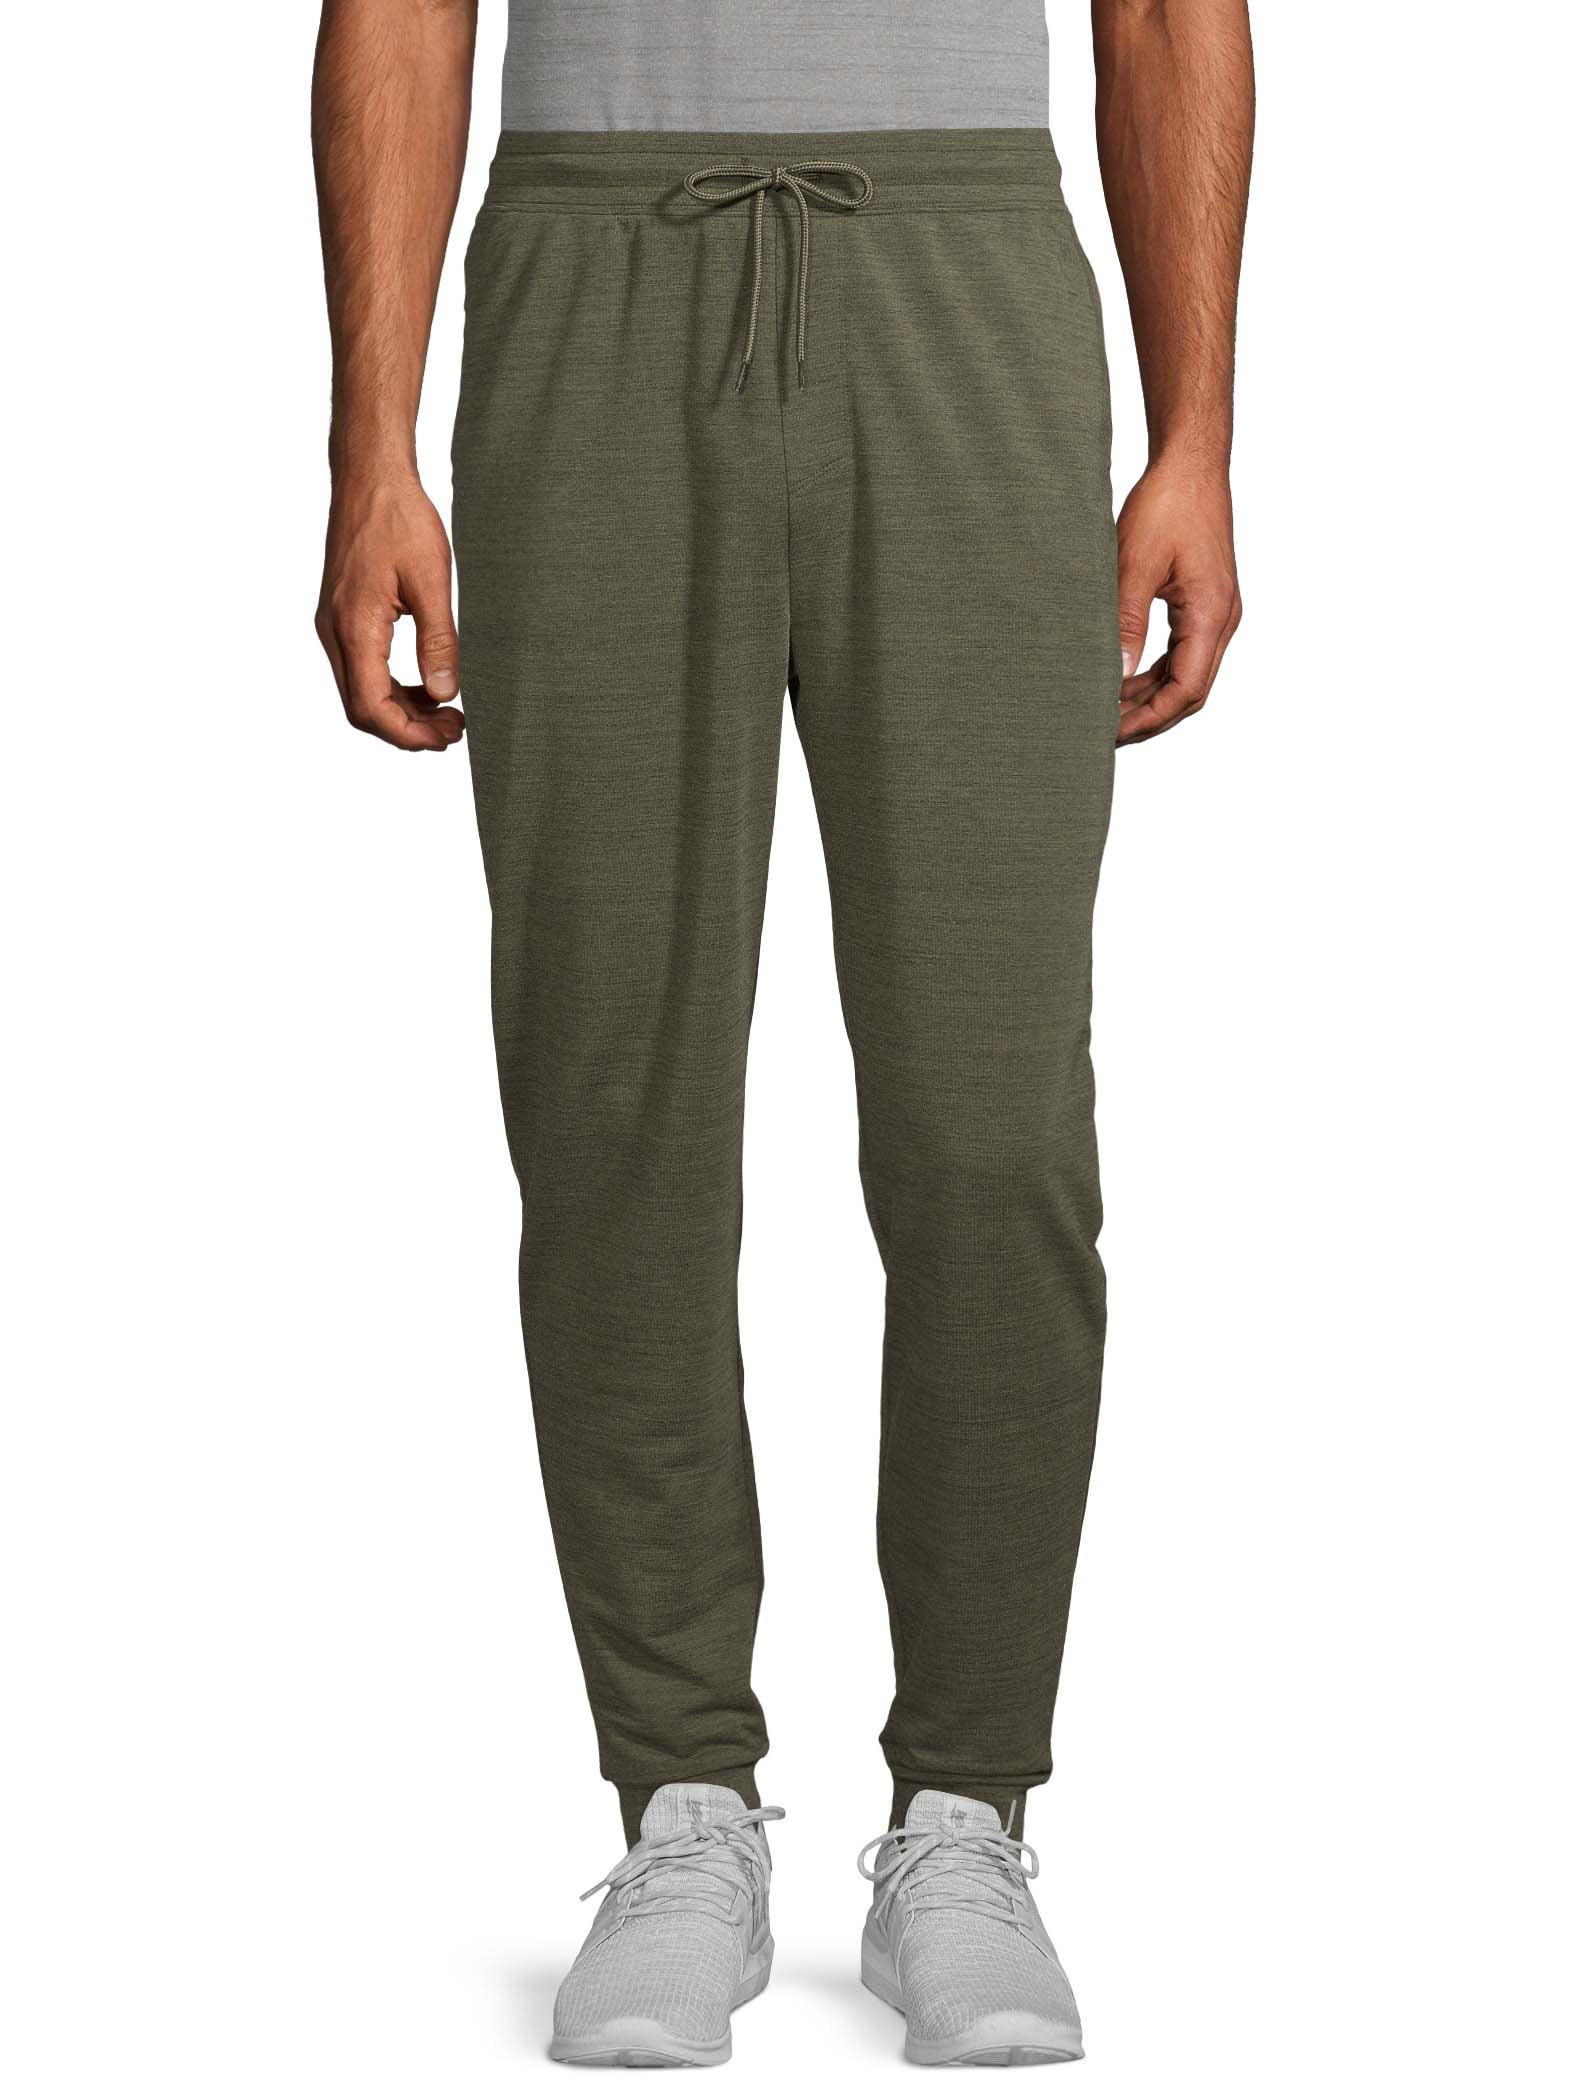 Athletic Works Men’s and Big Men's Knit Joggers, up to 5XL - Walmart.com